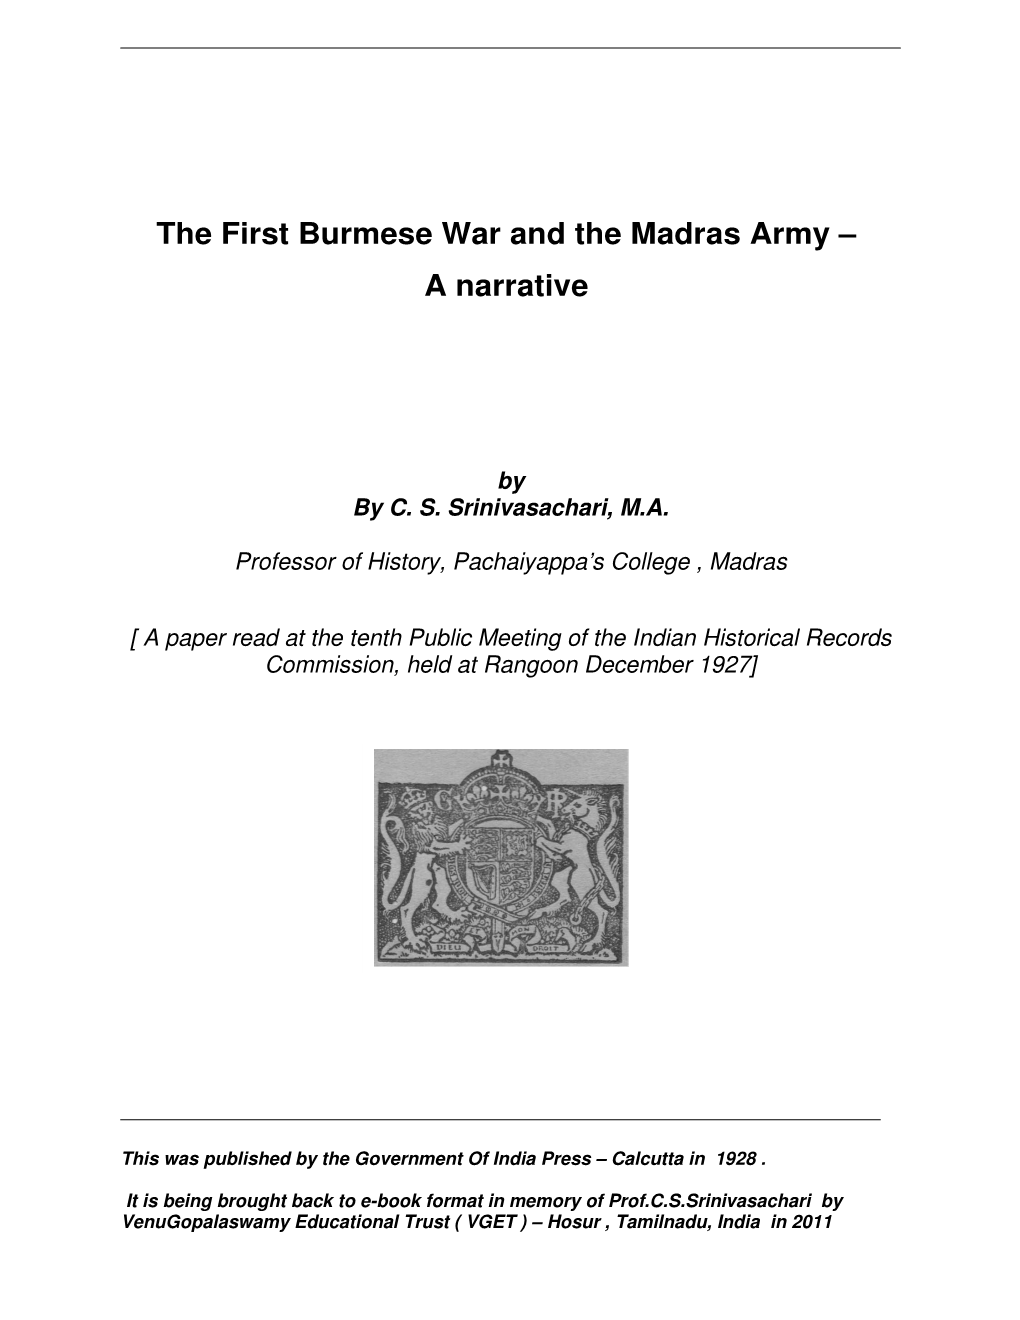 The First Burmese War and the Madras Army – a Narrative